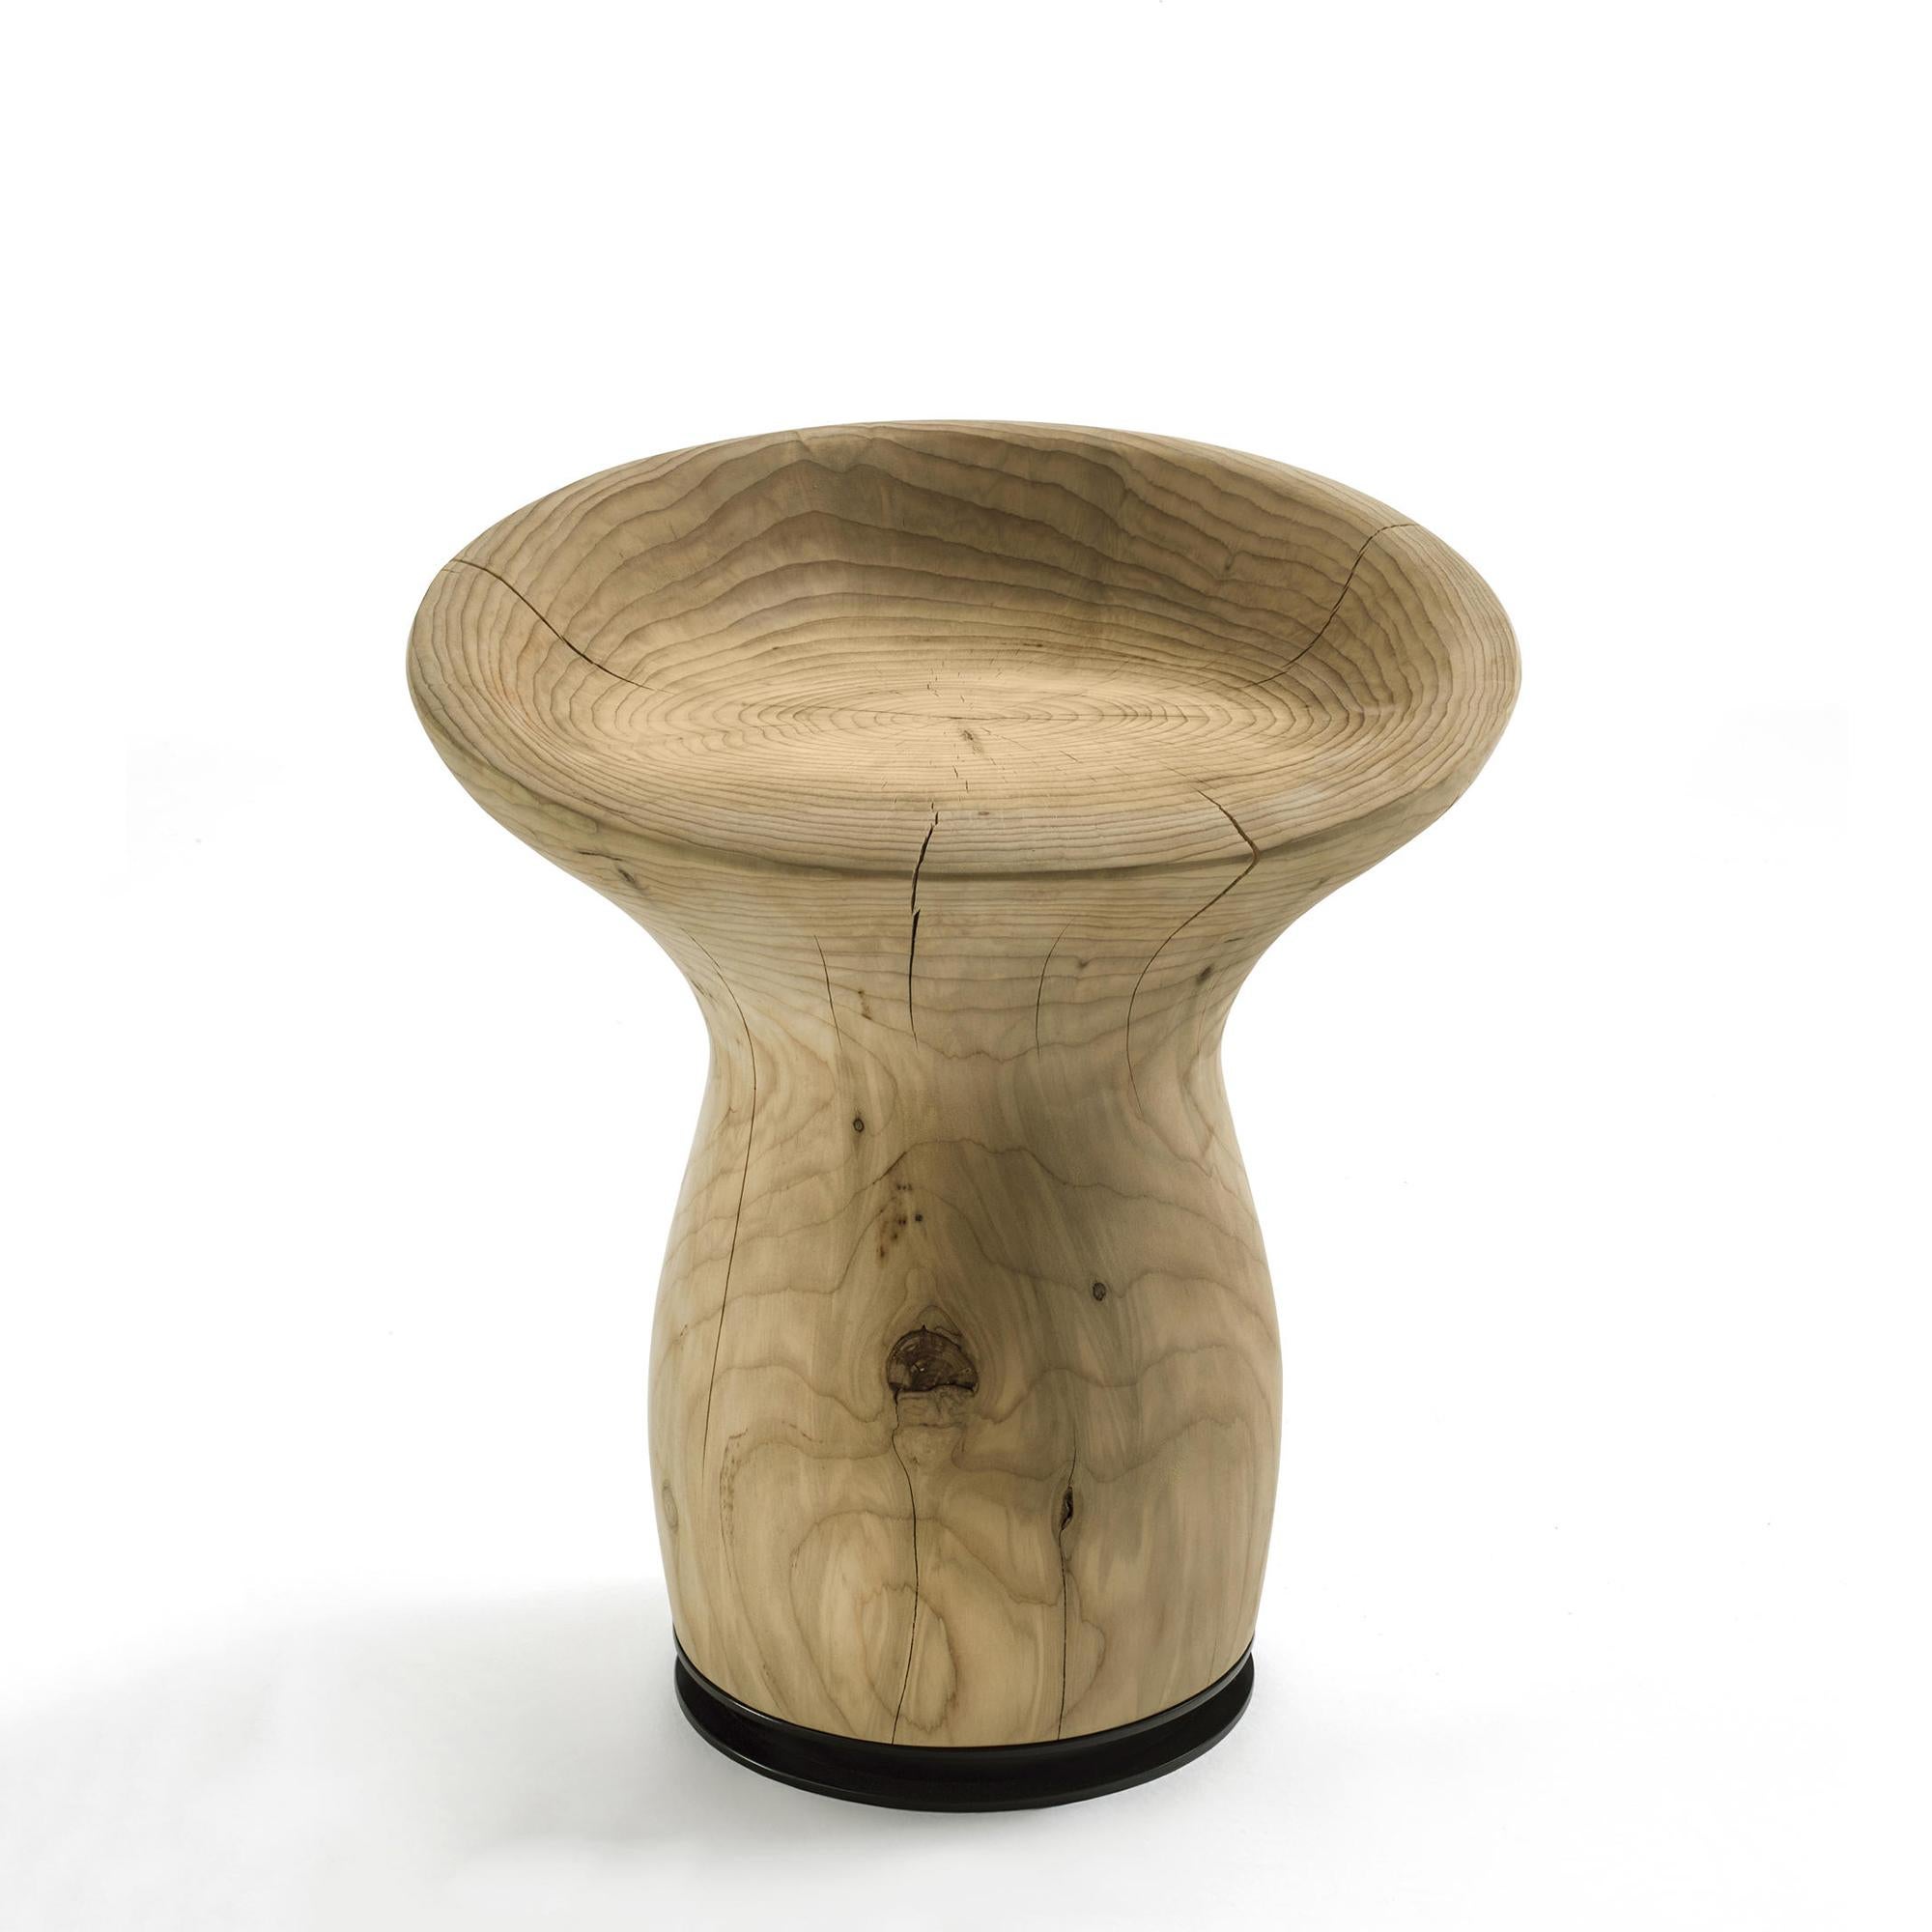 Stool Mamba all in natural solid oak wood,
treated with natural pine extracts. Base in
iron in dark finish.